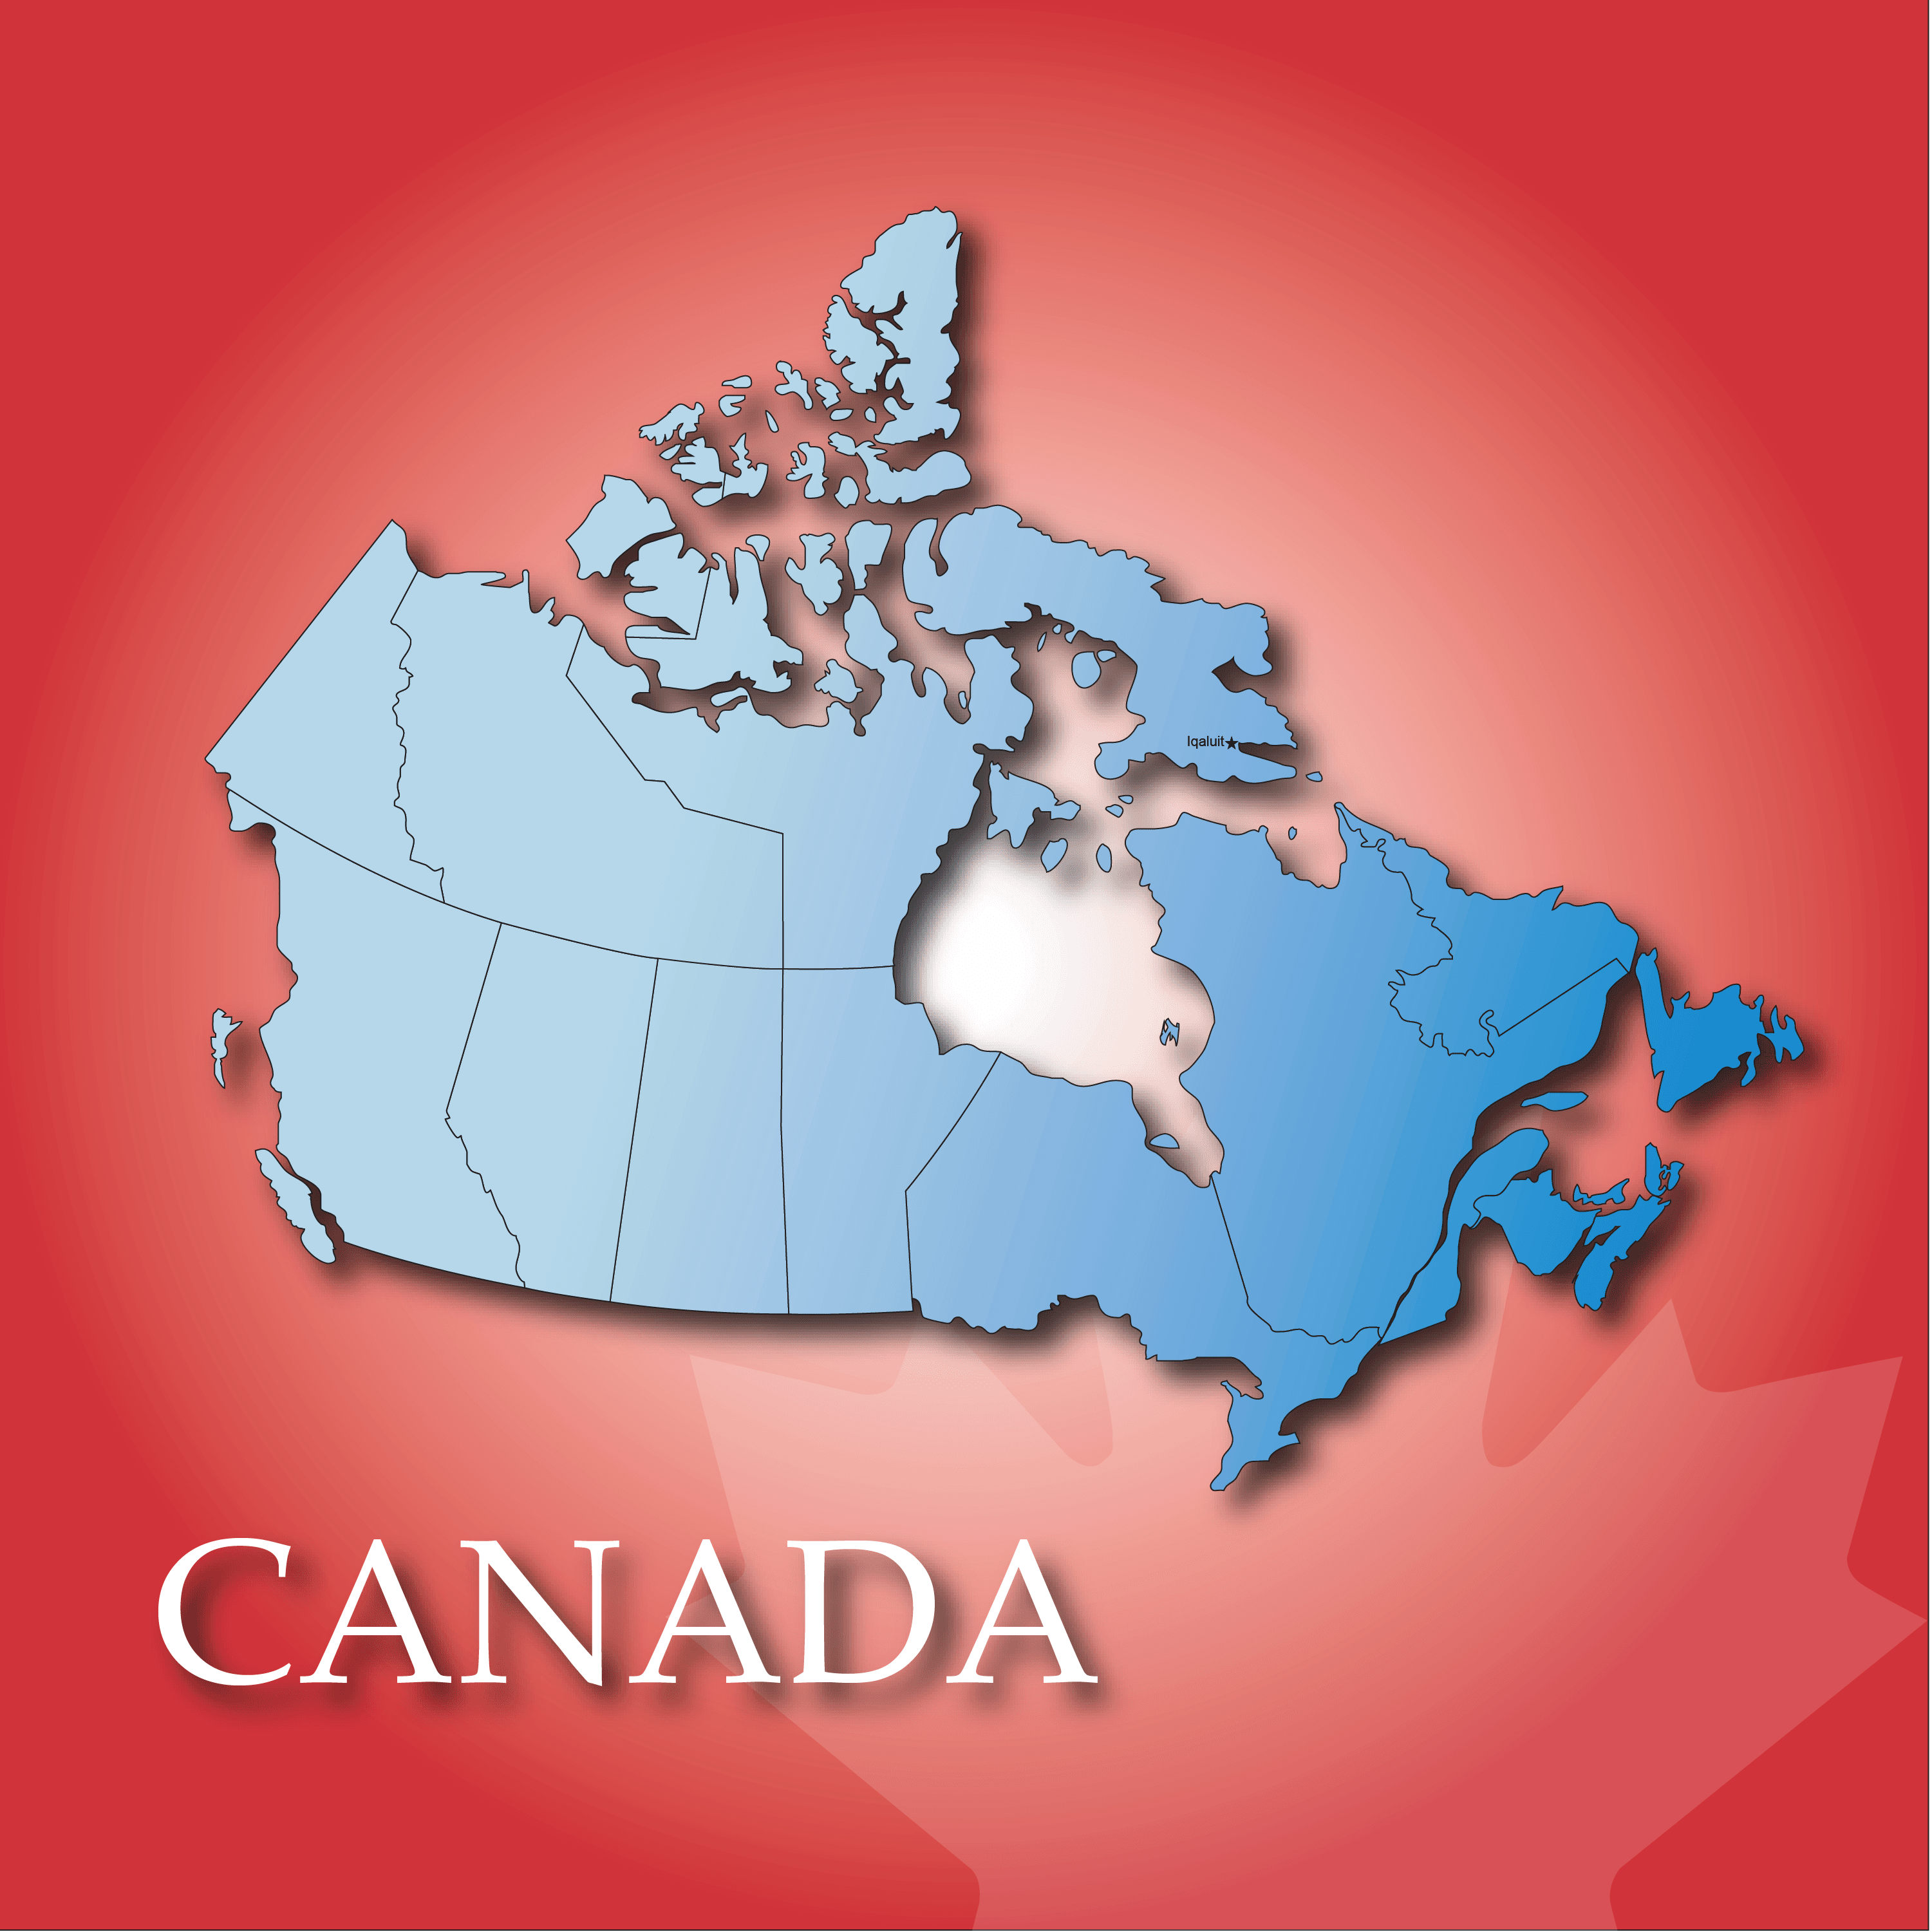 Canada with red background